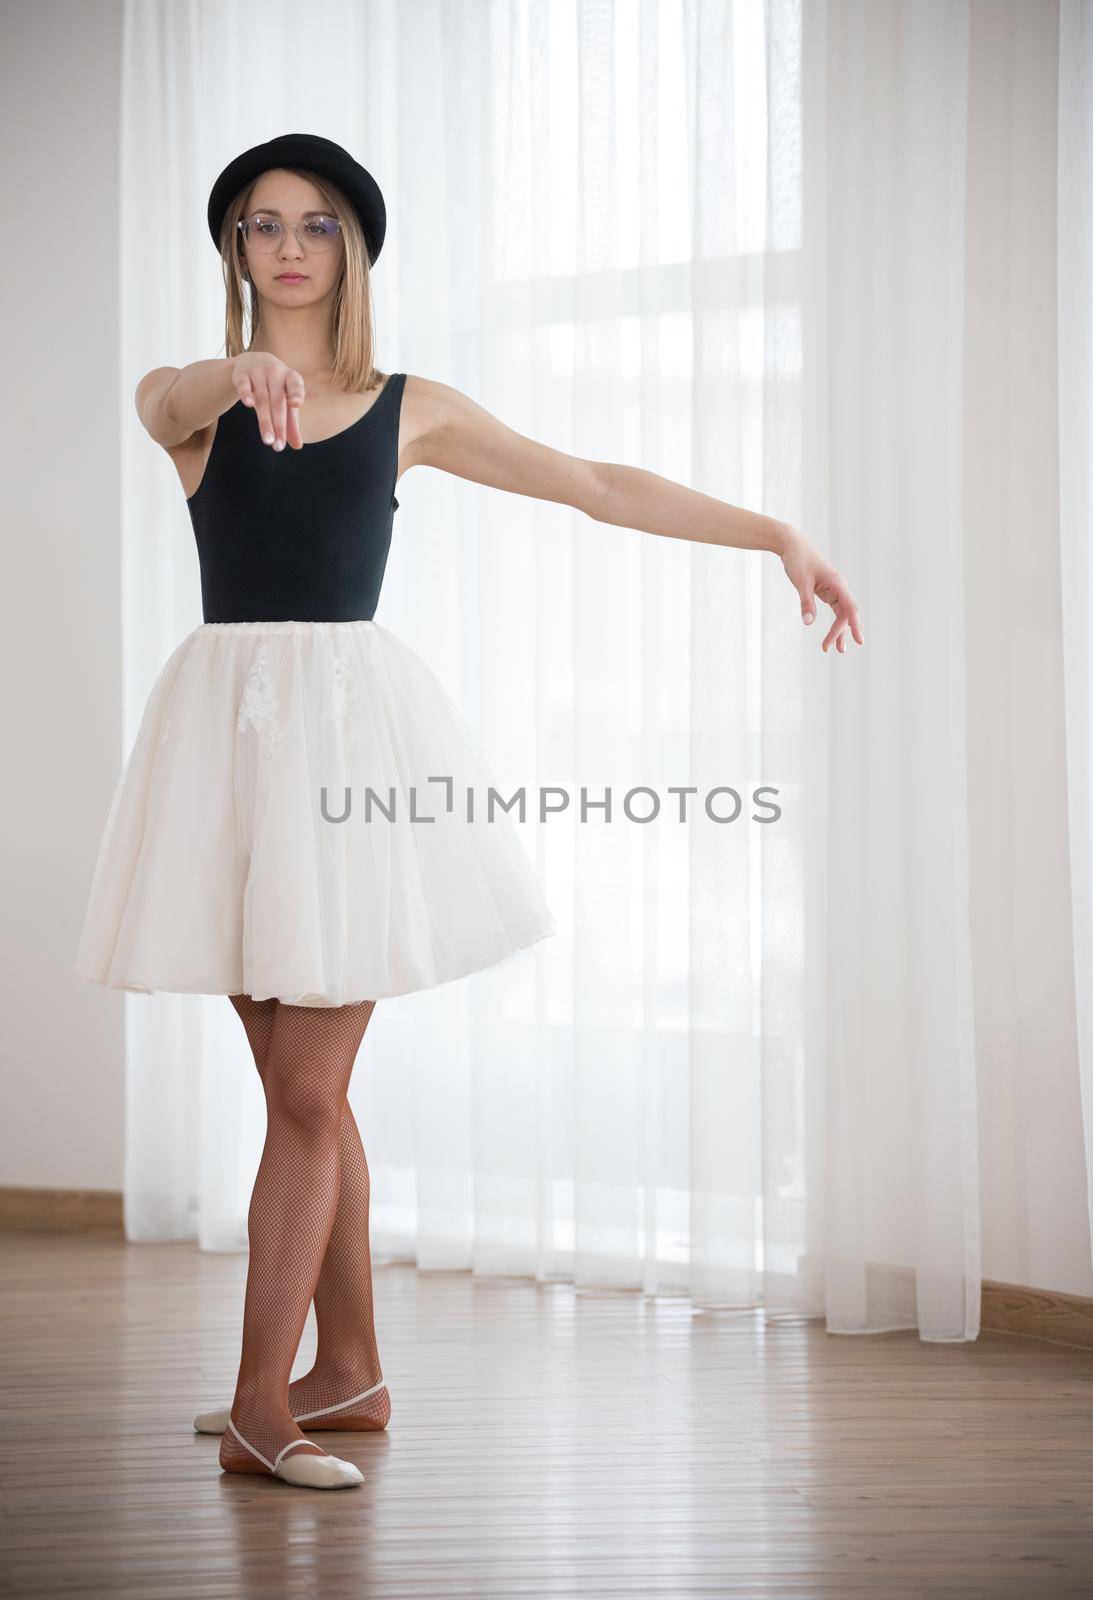 Ballerina in the hat is stretching out her arm forward, in the studio, telephoto shot